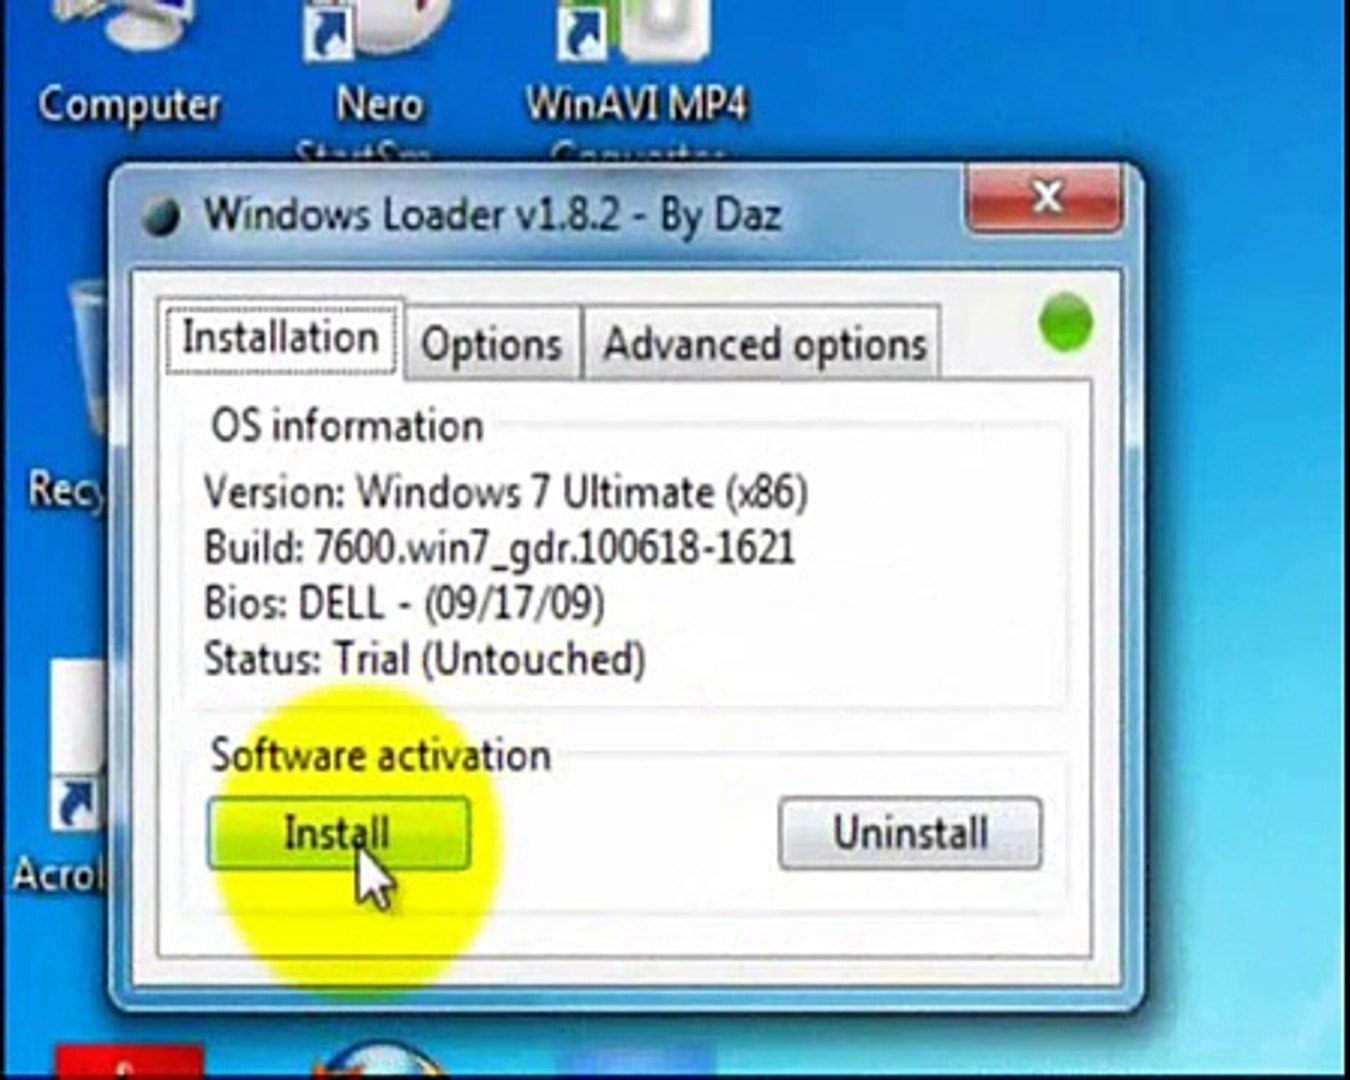 Windows 7 Ultimate Product Key Activation - how to activate window 7  complete tutorial - video Dailymotion